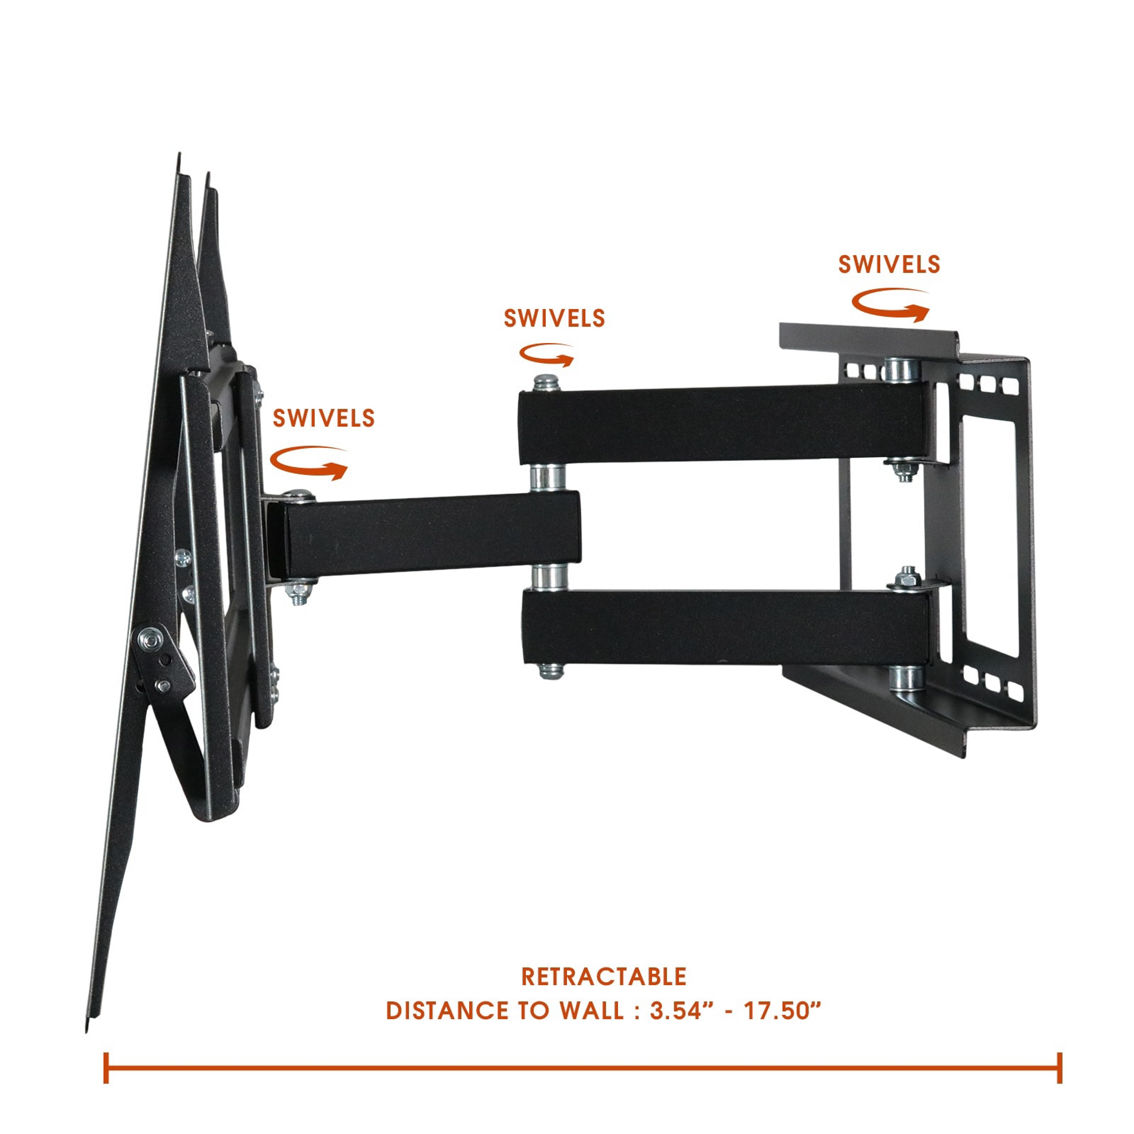 MegaMounts Full Motion Television Wall Mount with Bubble Level for 32-70 Inch Di - Image 4 of 4